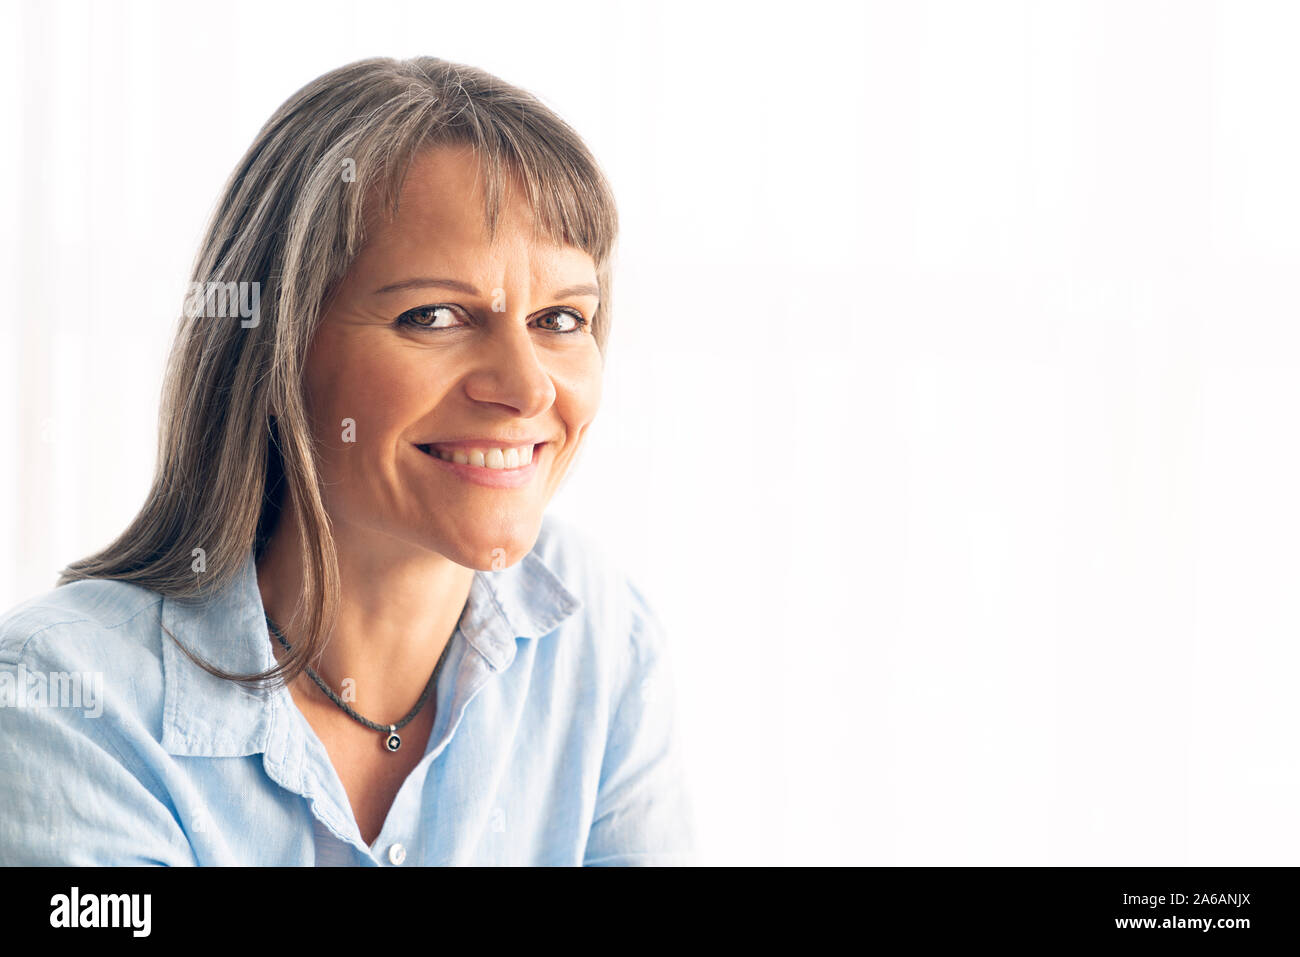 portrait of a middle aged woman with grey hair Stock Photo